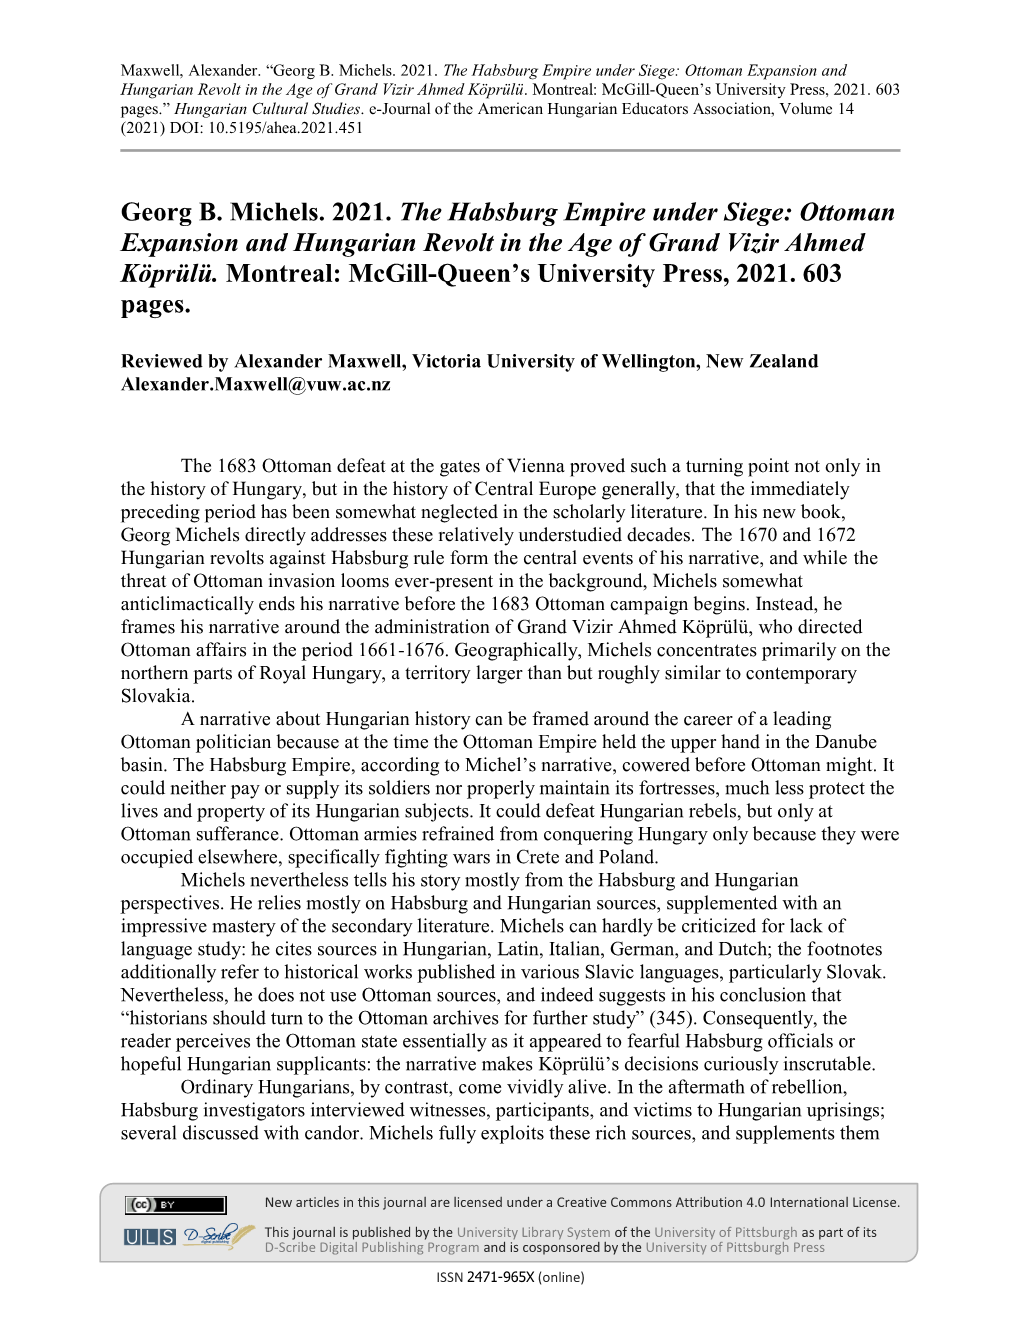 Georg B. Michels. 2021. the Habsburg Empire Under Siege: Ottoman Expansion and Hungarian Revolt in the Age of Grand Vizir Ahmed Köprülü